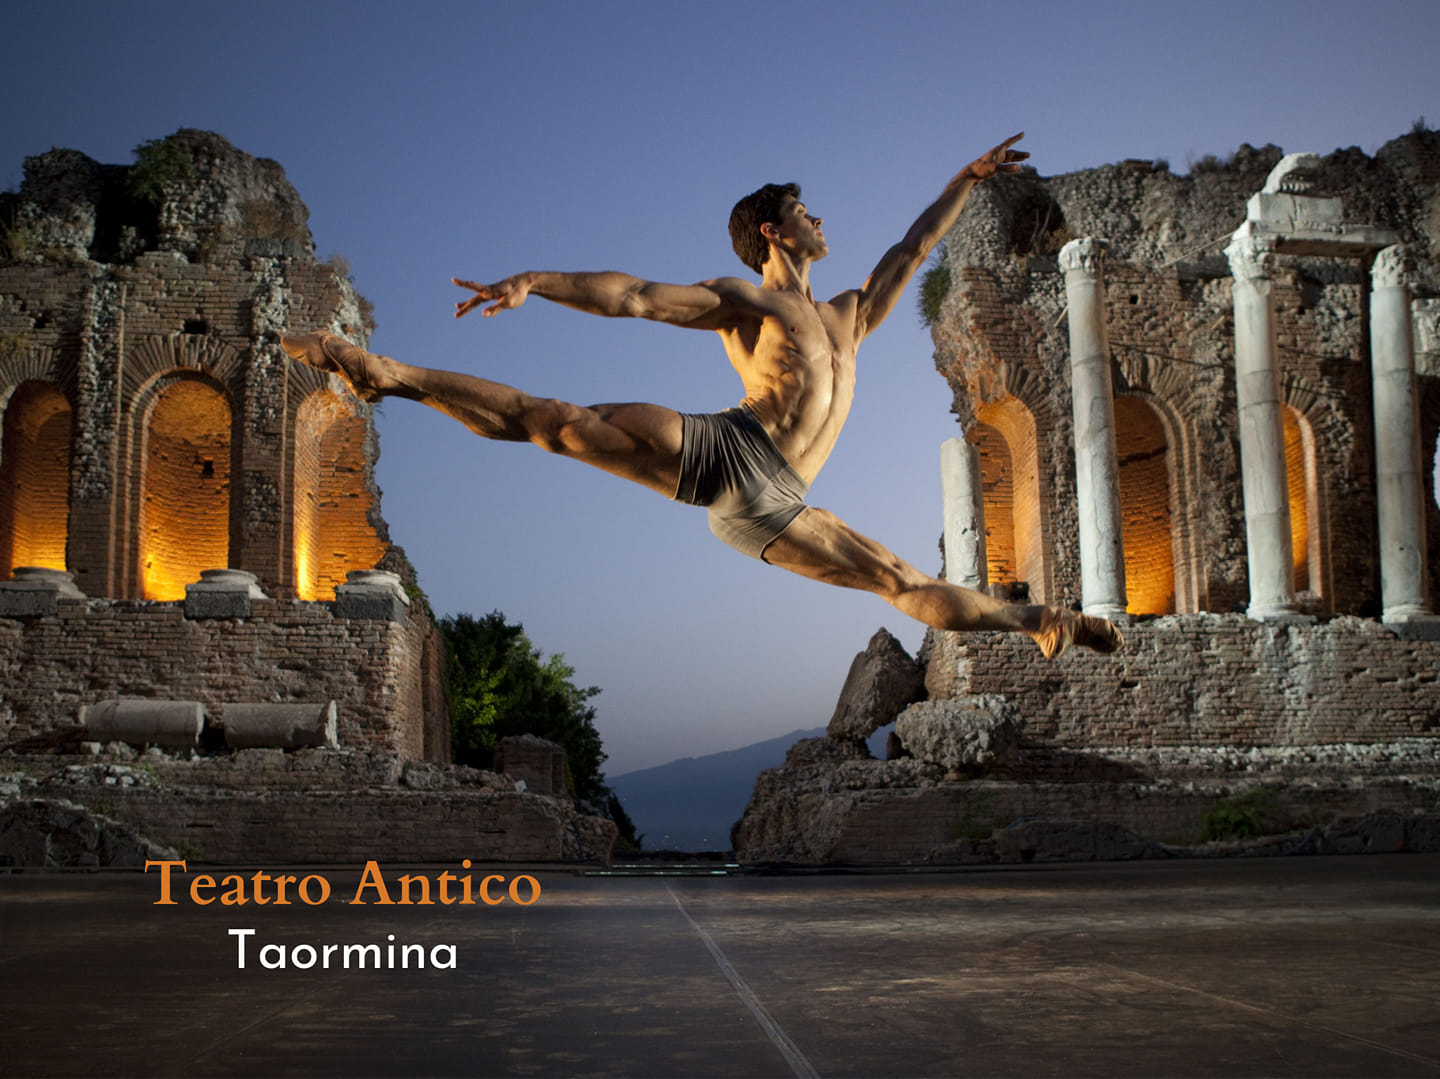 July 29, 2022 - Roberto Bolle and Friends - Taormina